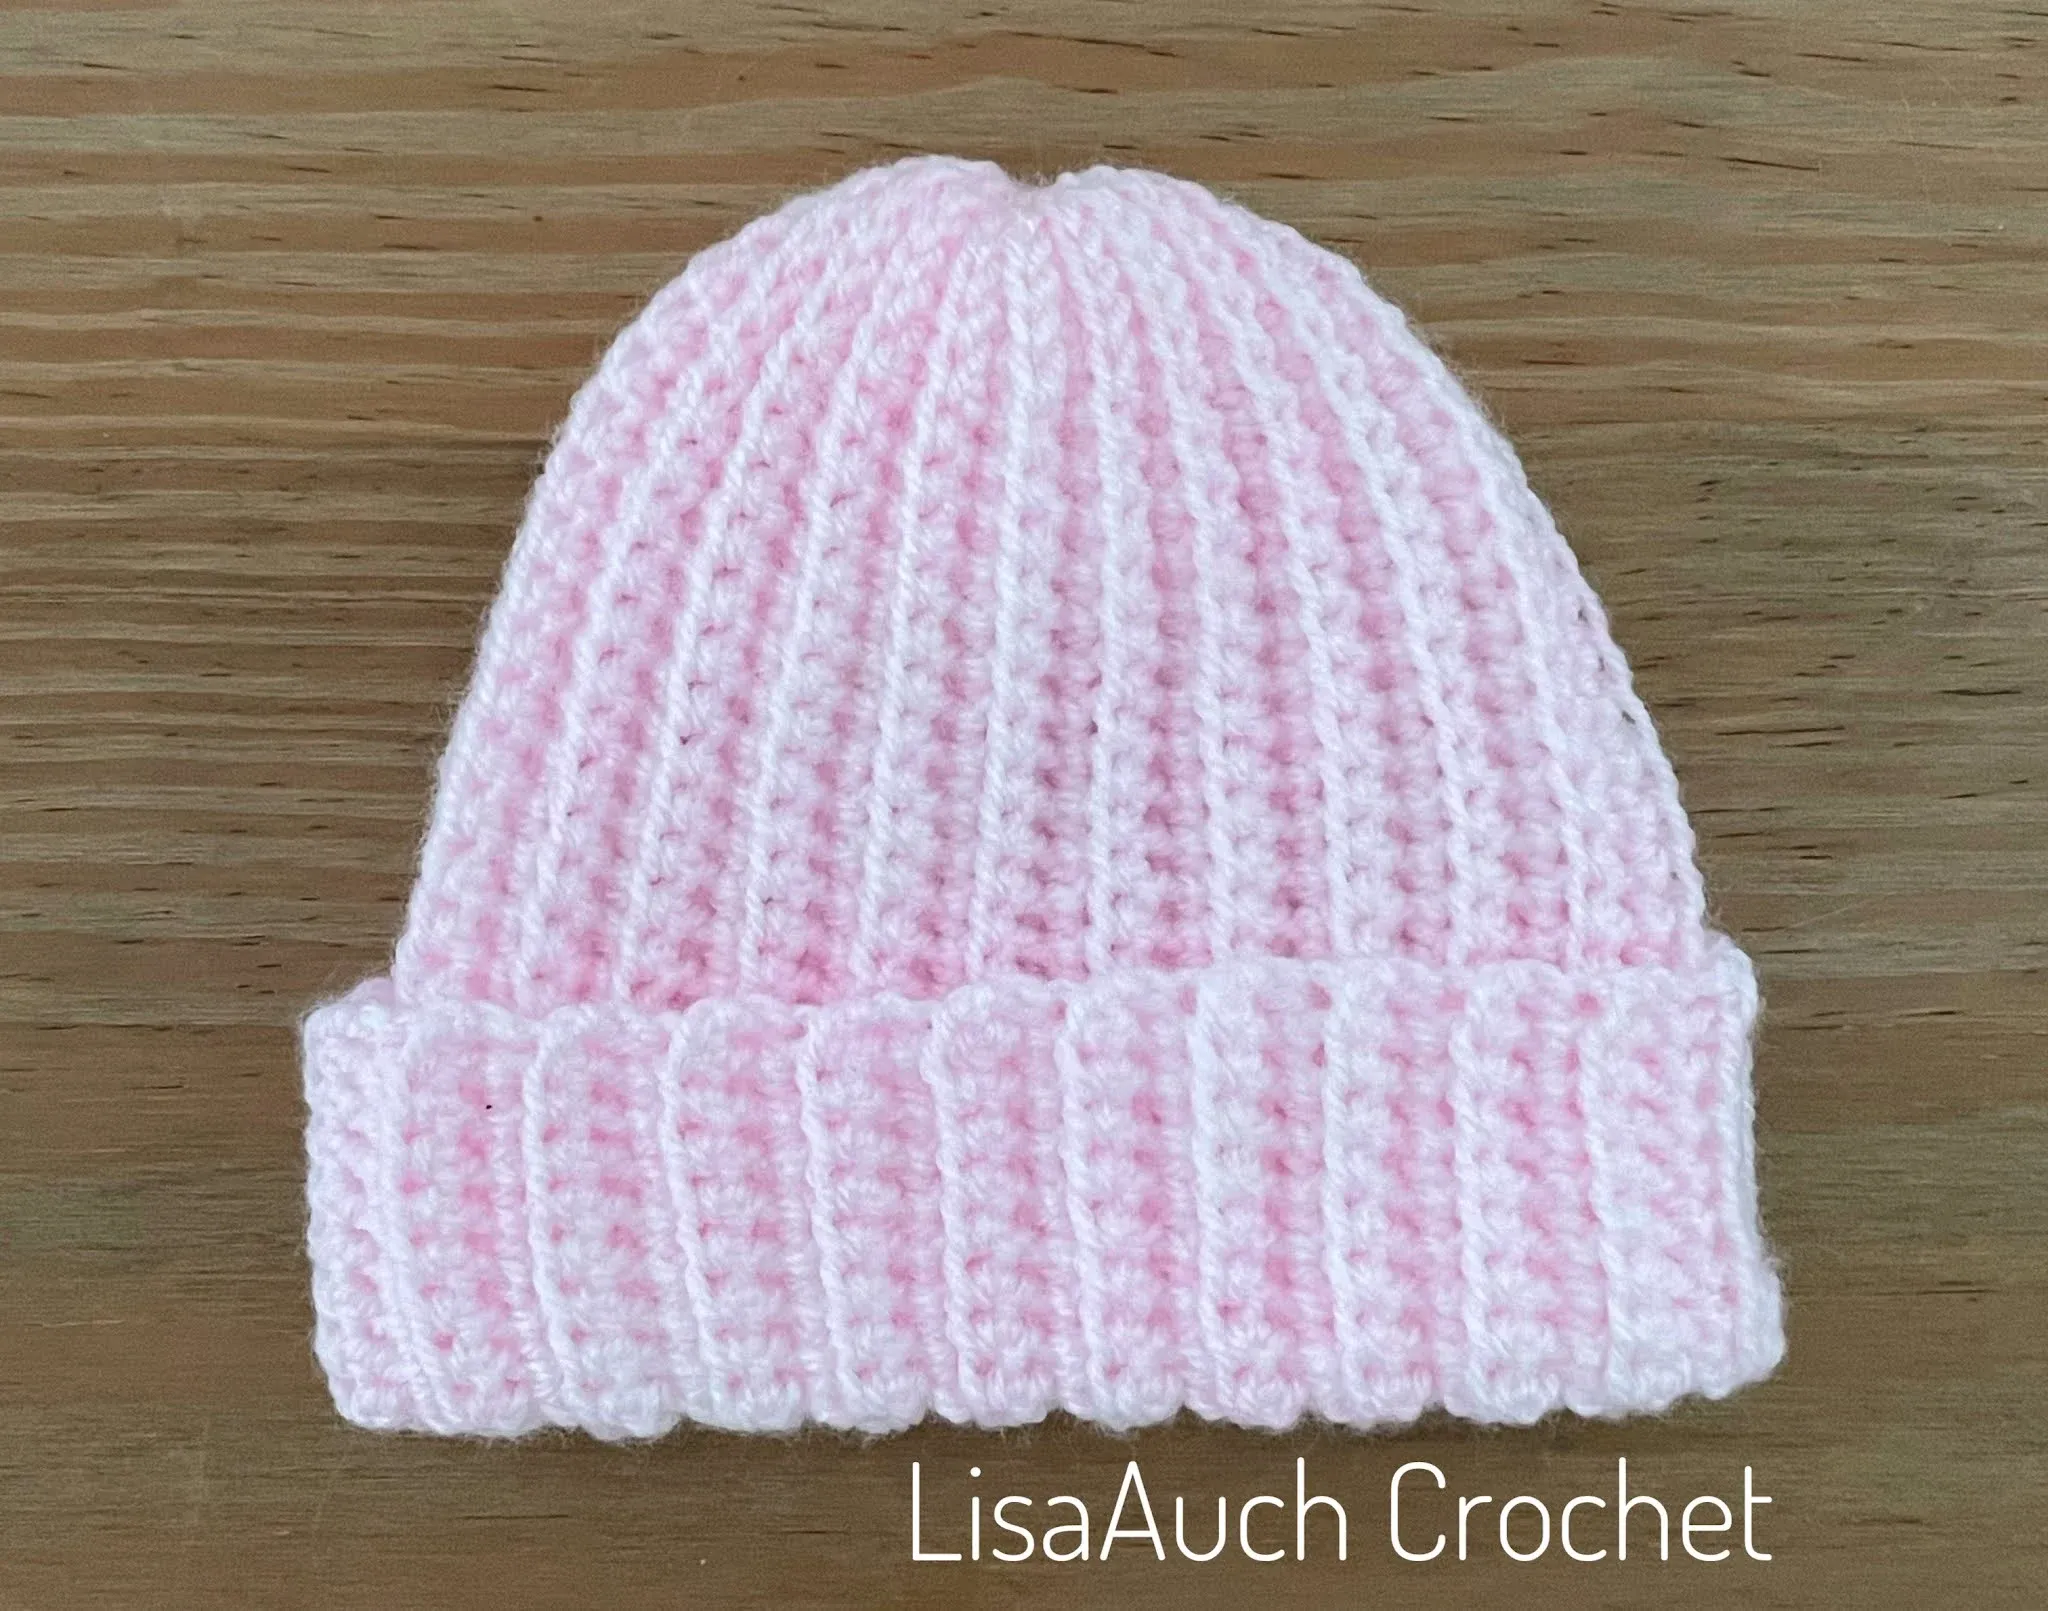 ribbed baby crochet hat pattern FREE, Crochet hat to donate to hospitals